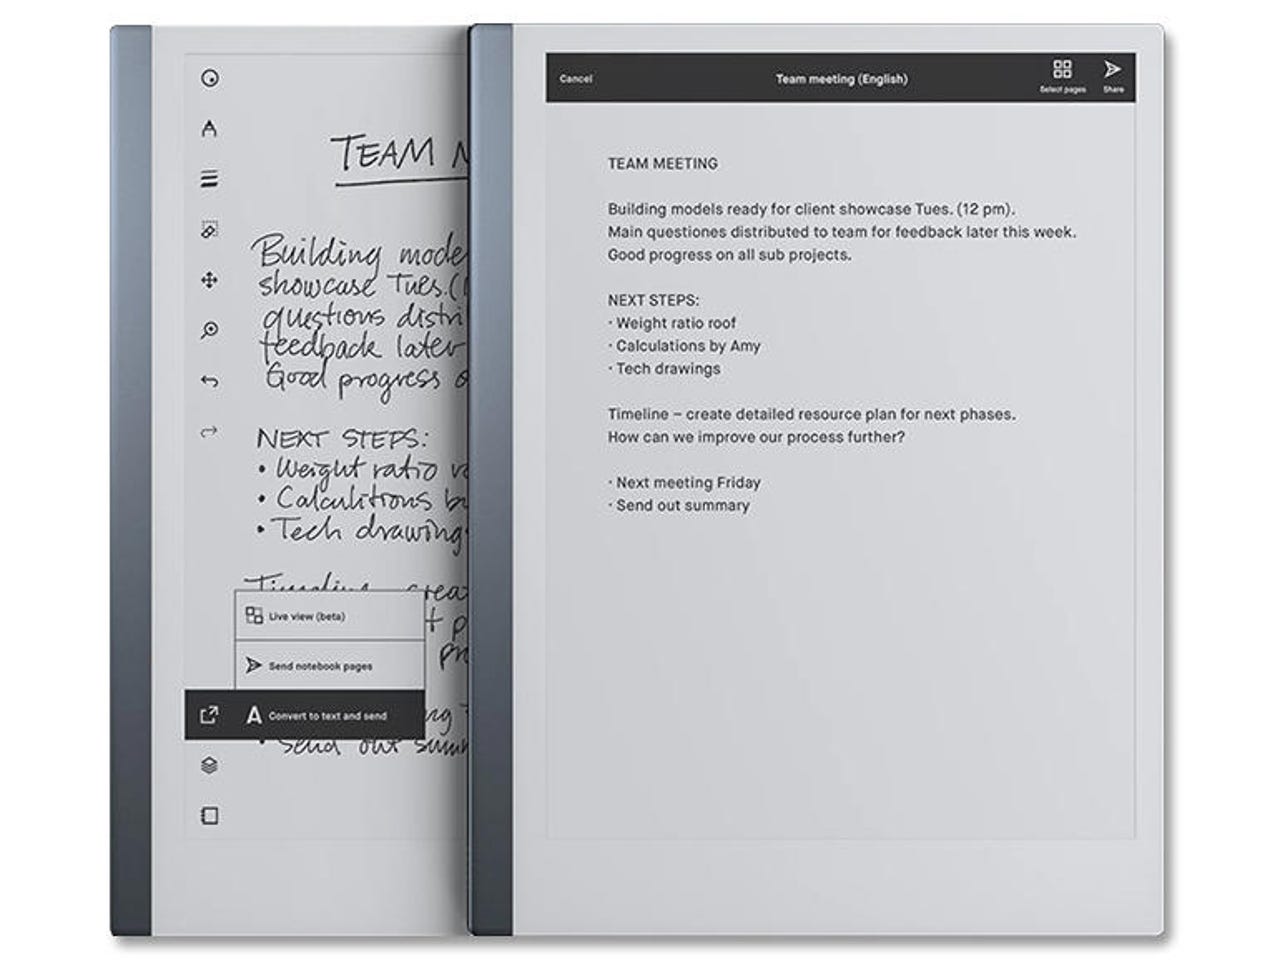 reMarkable 2 E-Ink tablet review: Superb for on-screen writing